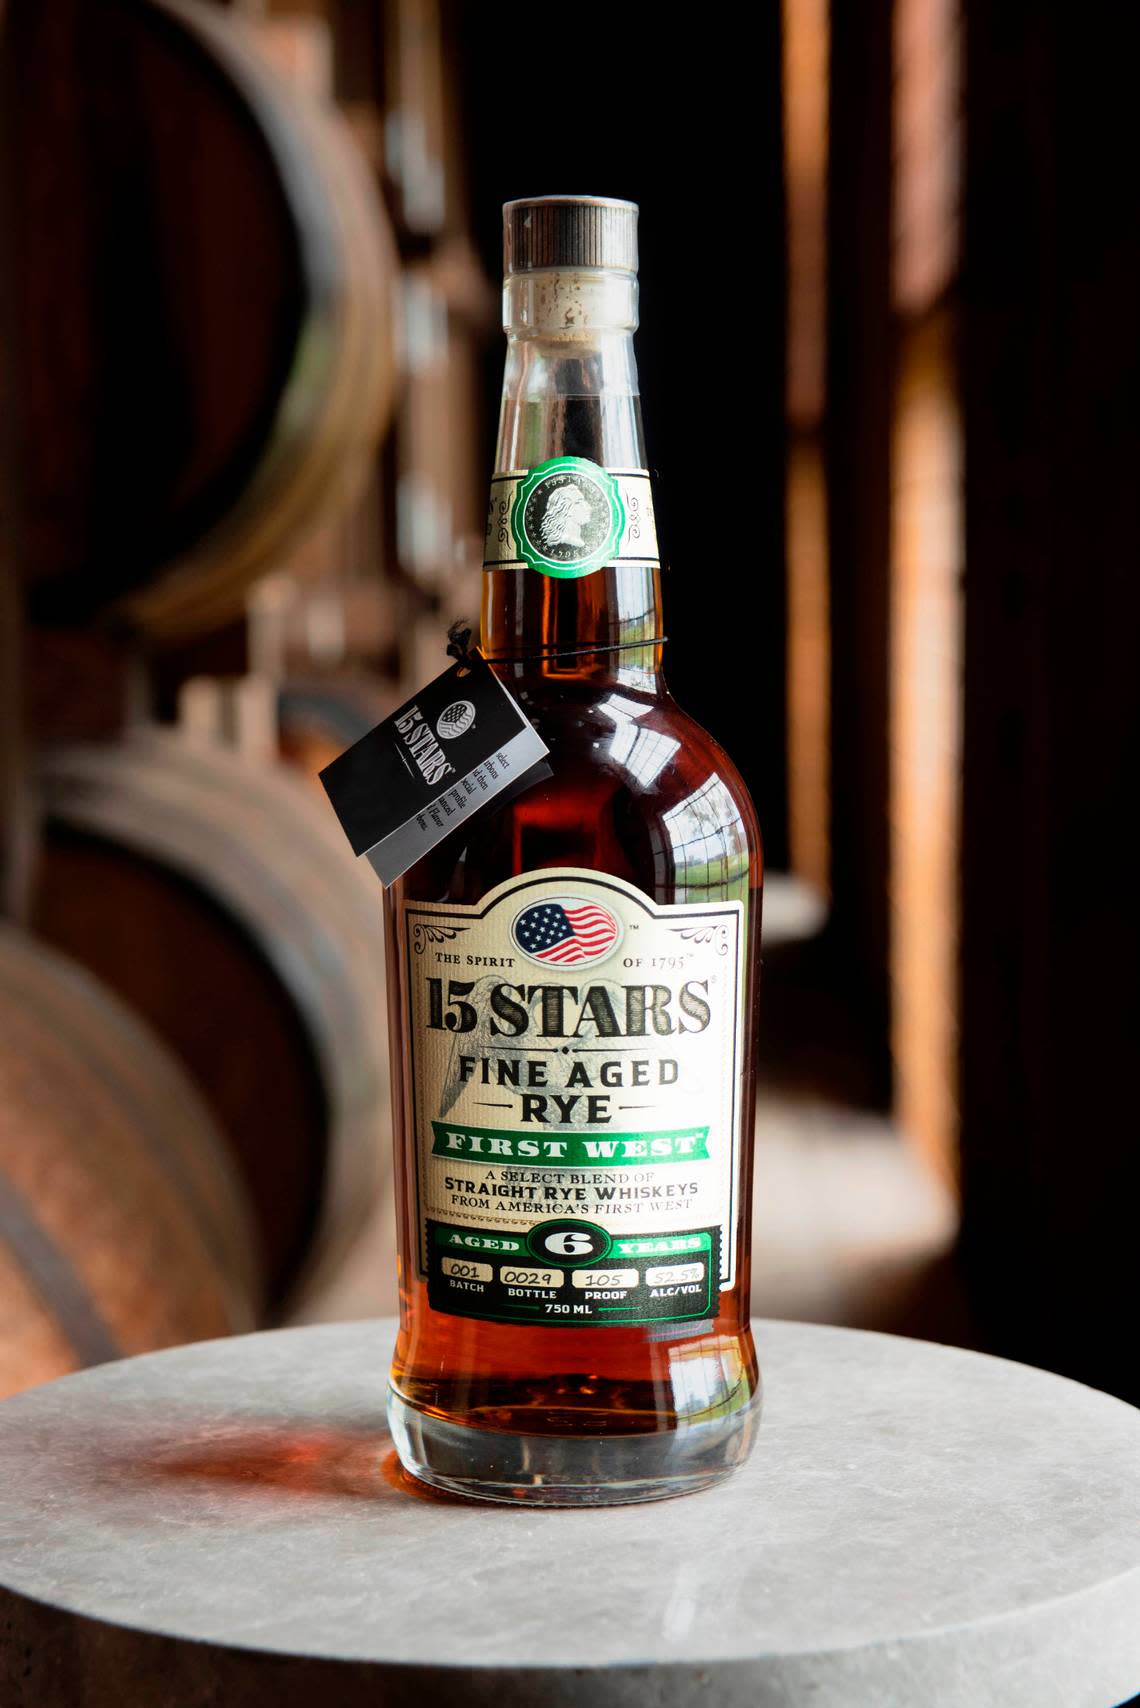 15 STARS First West Rye, released earlier this year, Best in Show for 2023, Best Rye Whiskey for 2023, and Double Gold at the New York Wine and Spirits Competition. If you can still find a bottle, it would make a terrific addition to a holiday bar.